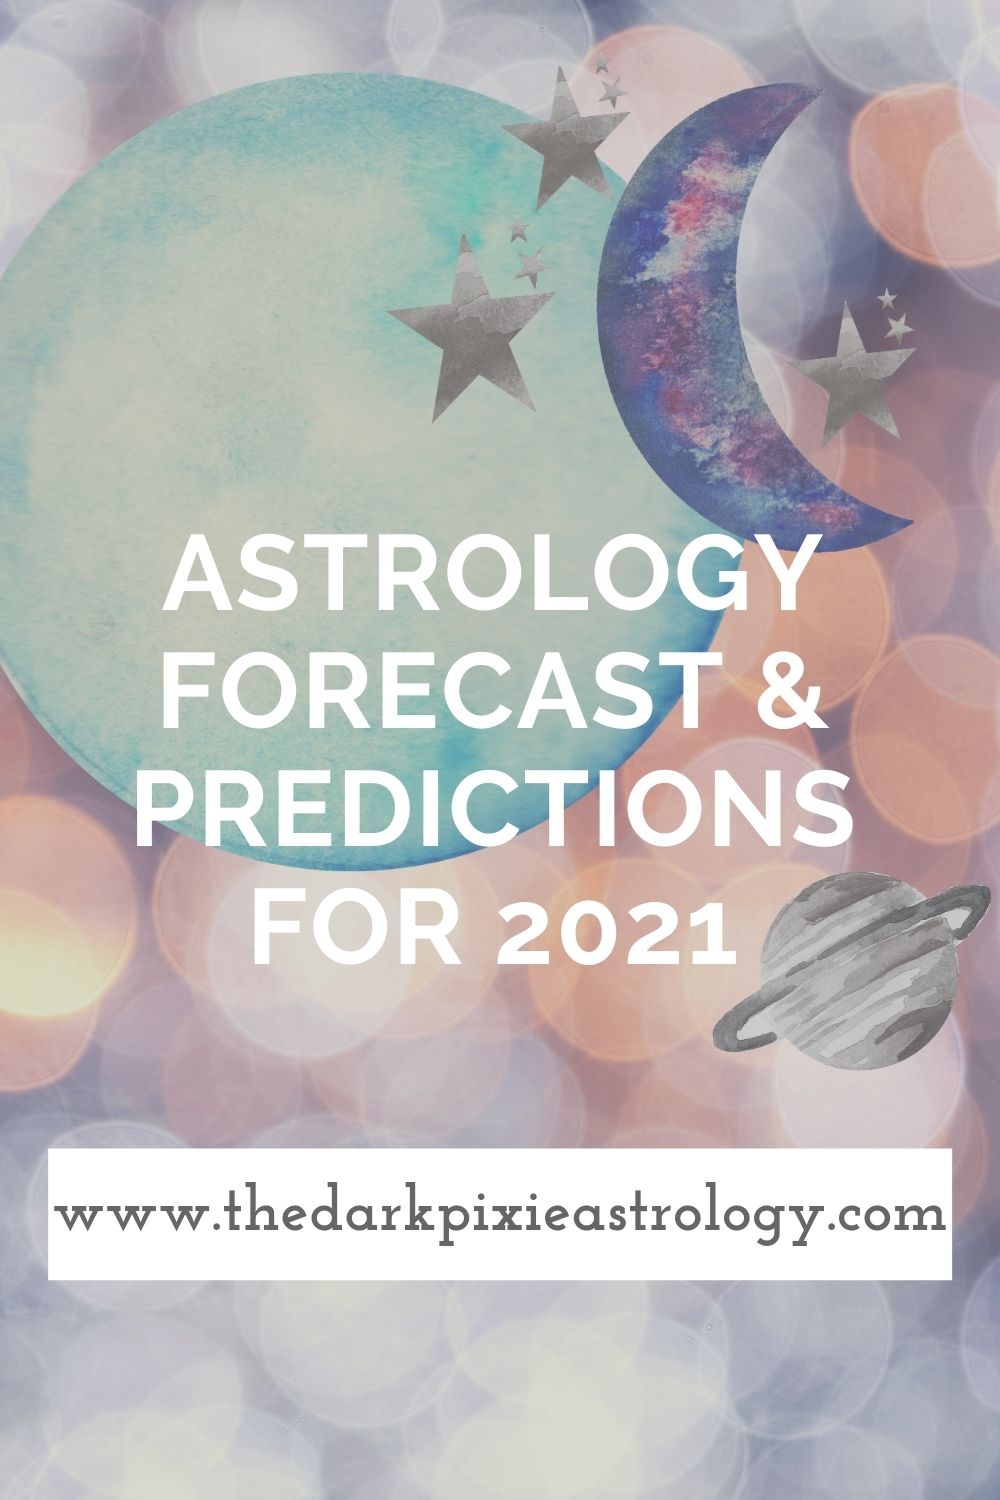 Astrology Forecast and Predictions for 2021 - Guest Article by Kelsie of Cosmic Occult